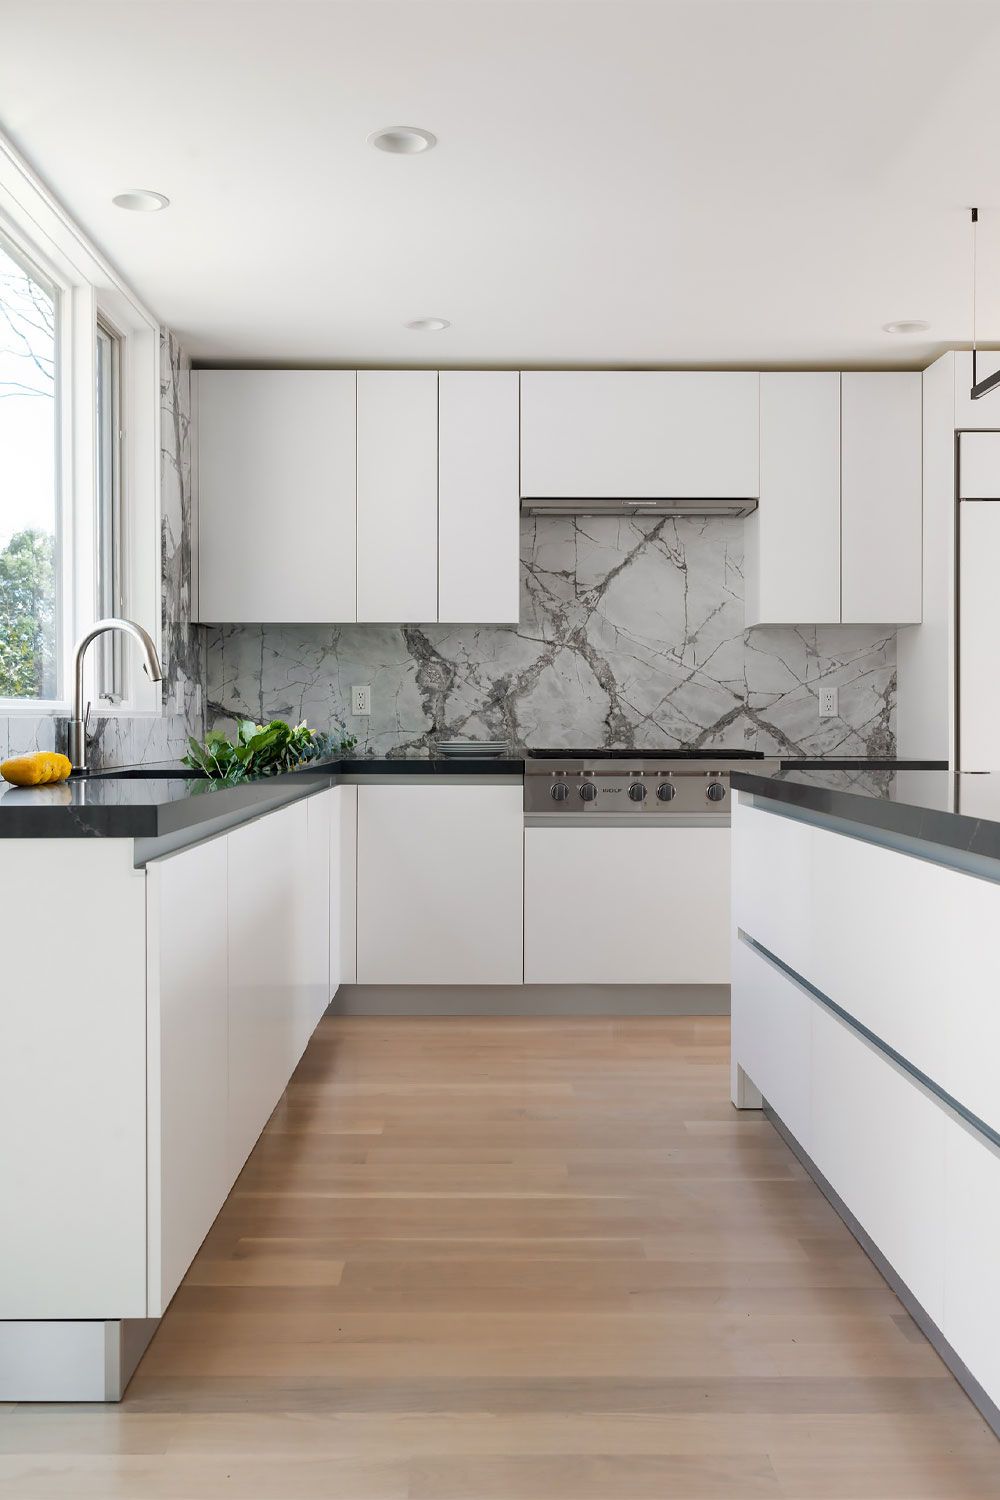 Sleek and Stylish: The Latest Trends in Modern Kitchen Cabinet and Countertop Designs